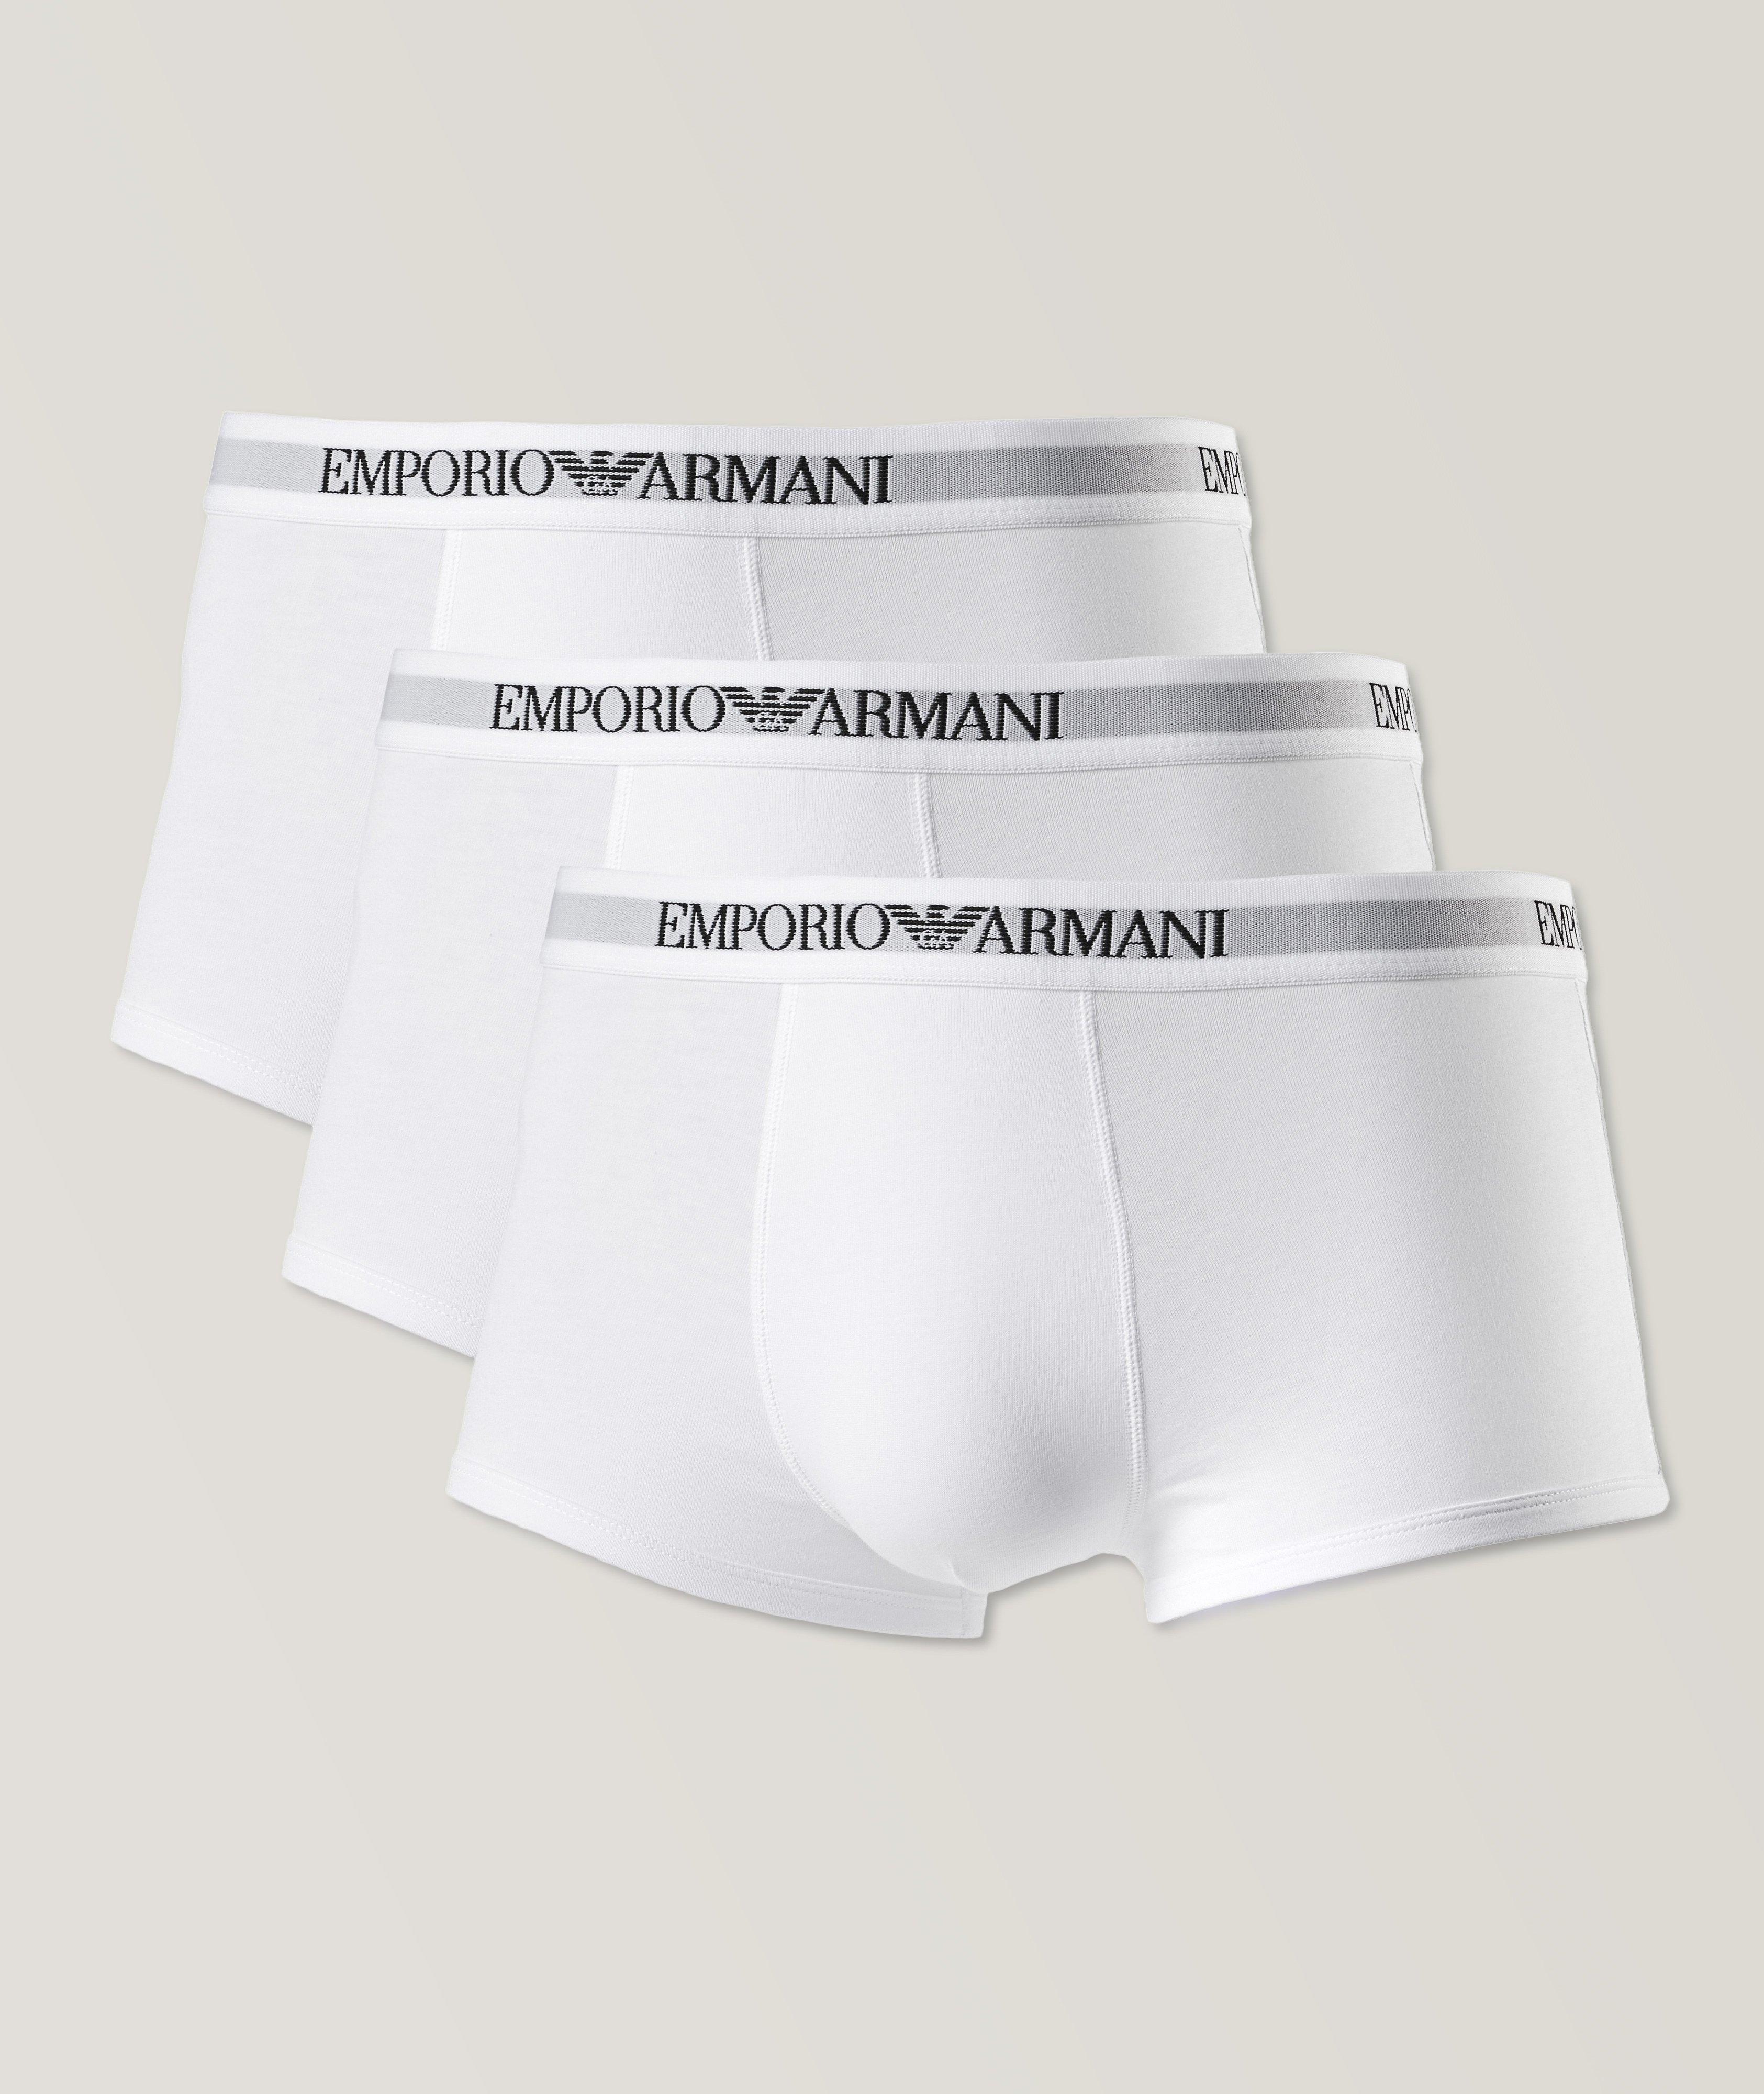 3-Pack Cotton Trunks image 0